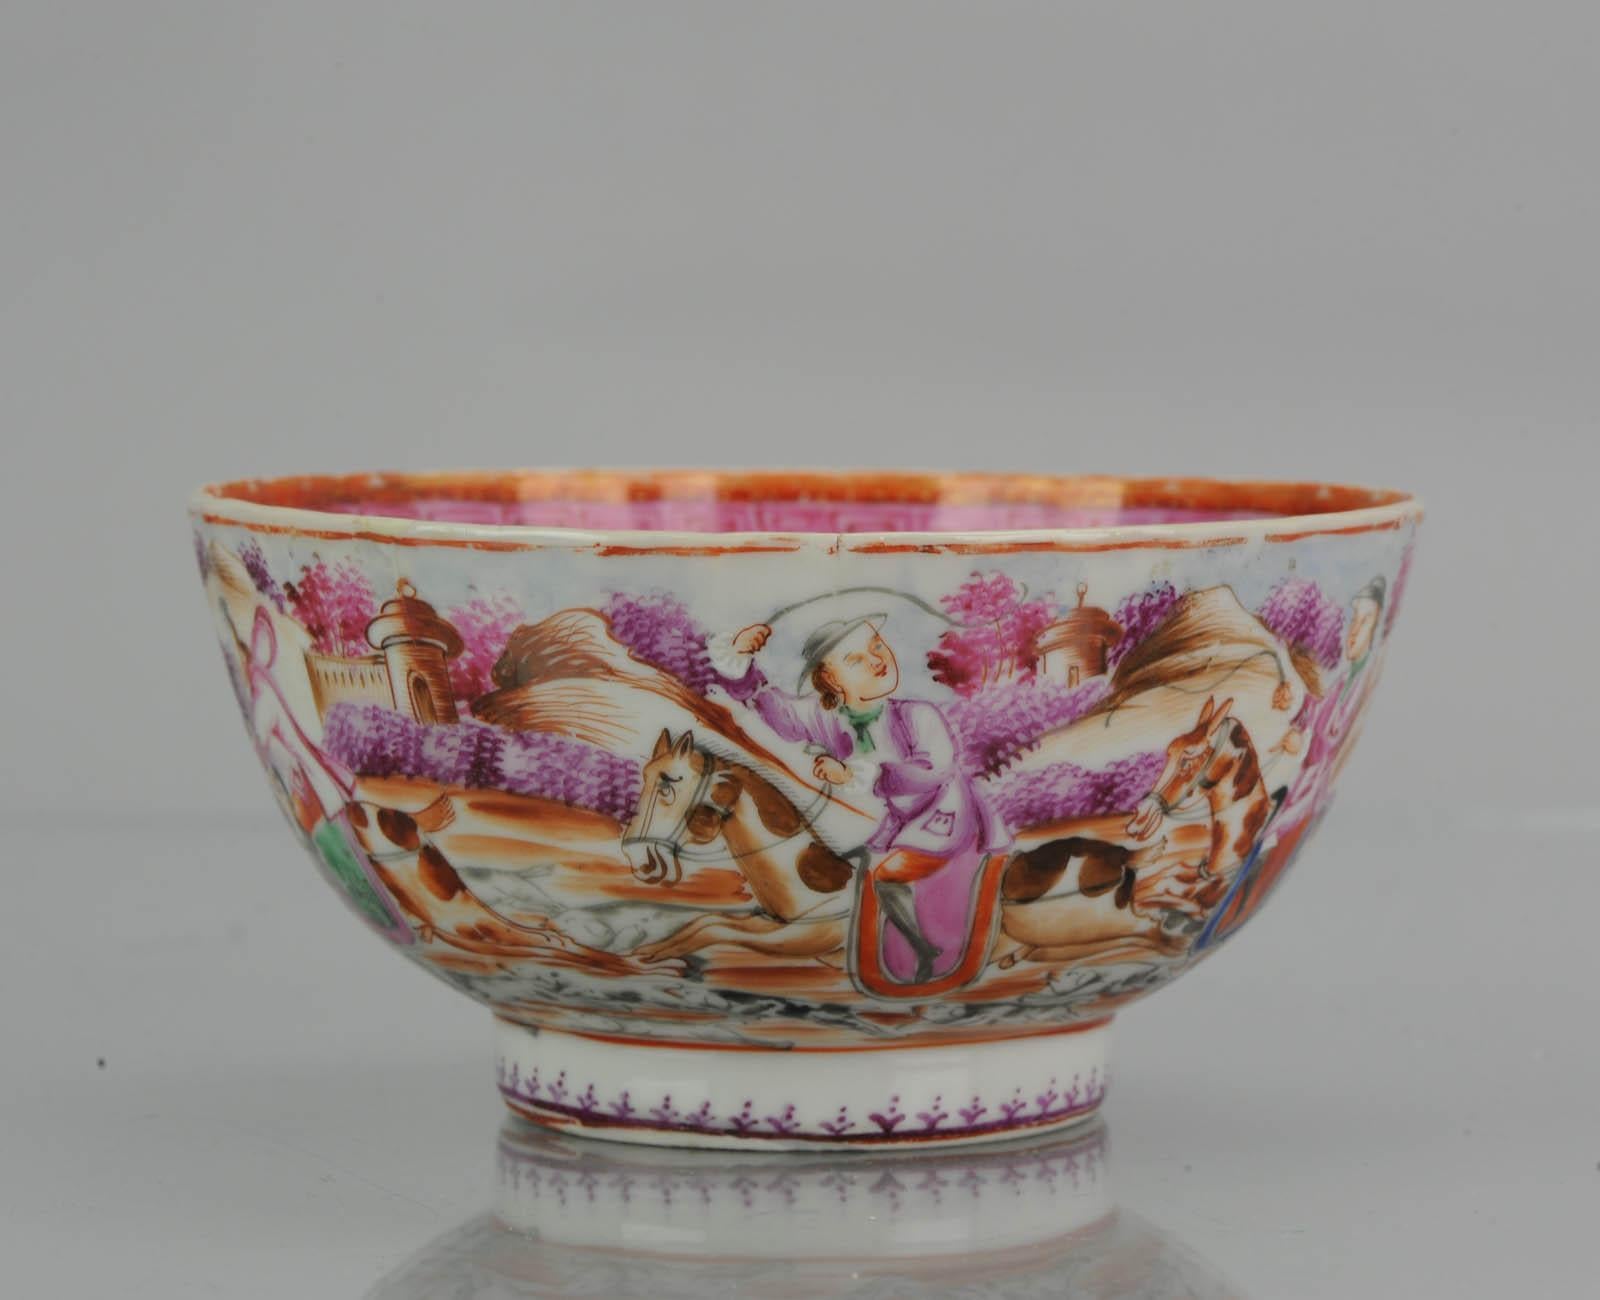 A very nicely made piece of 18th century Qianlong Mandarin Rose porcelain. With a nice hunting scene all around.

For similar examples of this type of border/decoration see:

Litzenburg, T. V. (2003). Chinese Export Porcelain in the Reeves